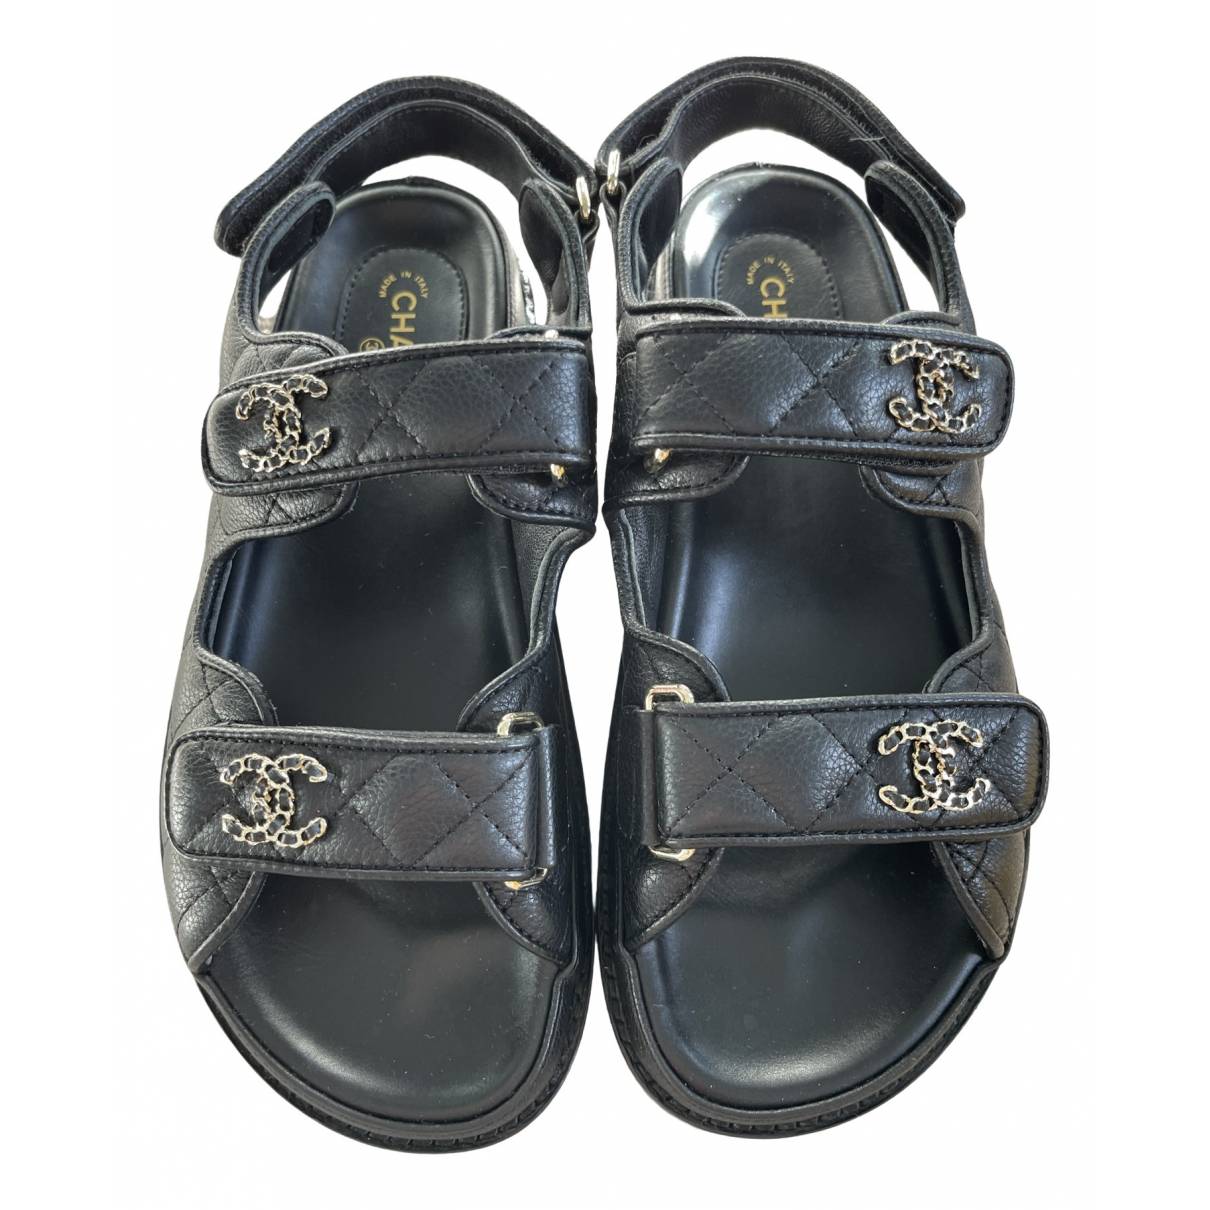 Dad sandals leather sandal Chanel Black size 39 EU in Leather - 24868595